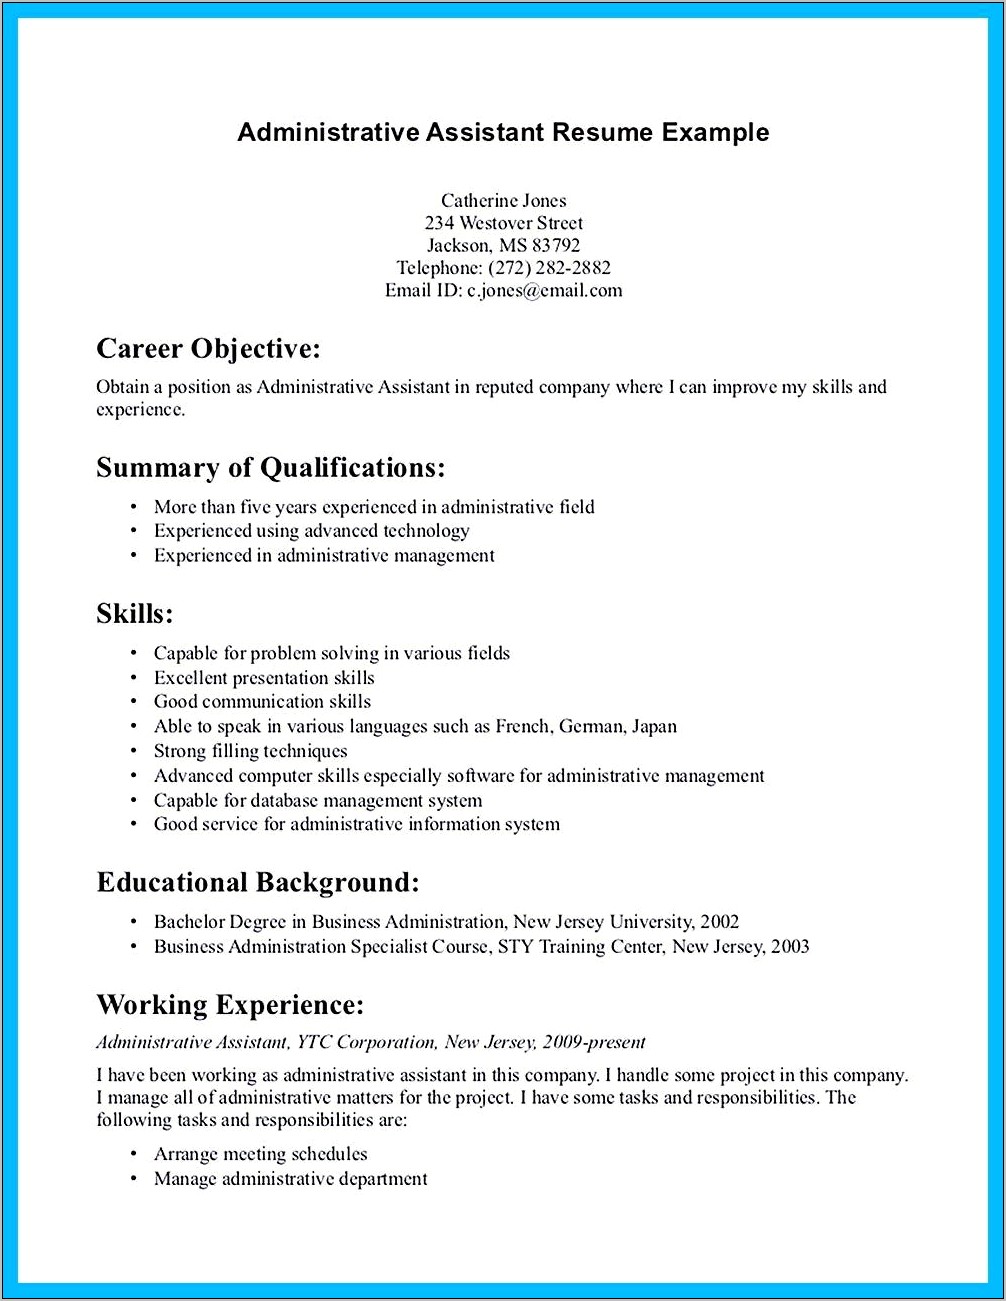 Example Of An Entre Levenadministrative Assistanct Resume